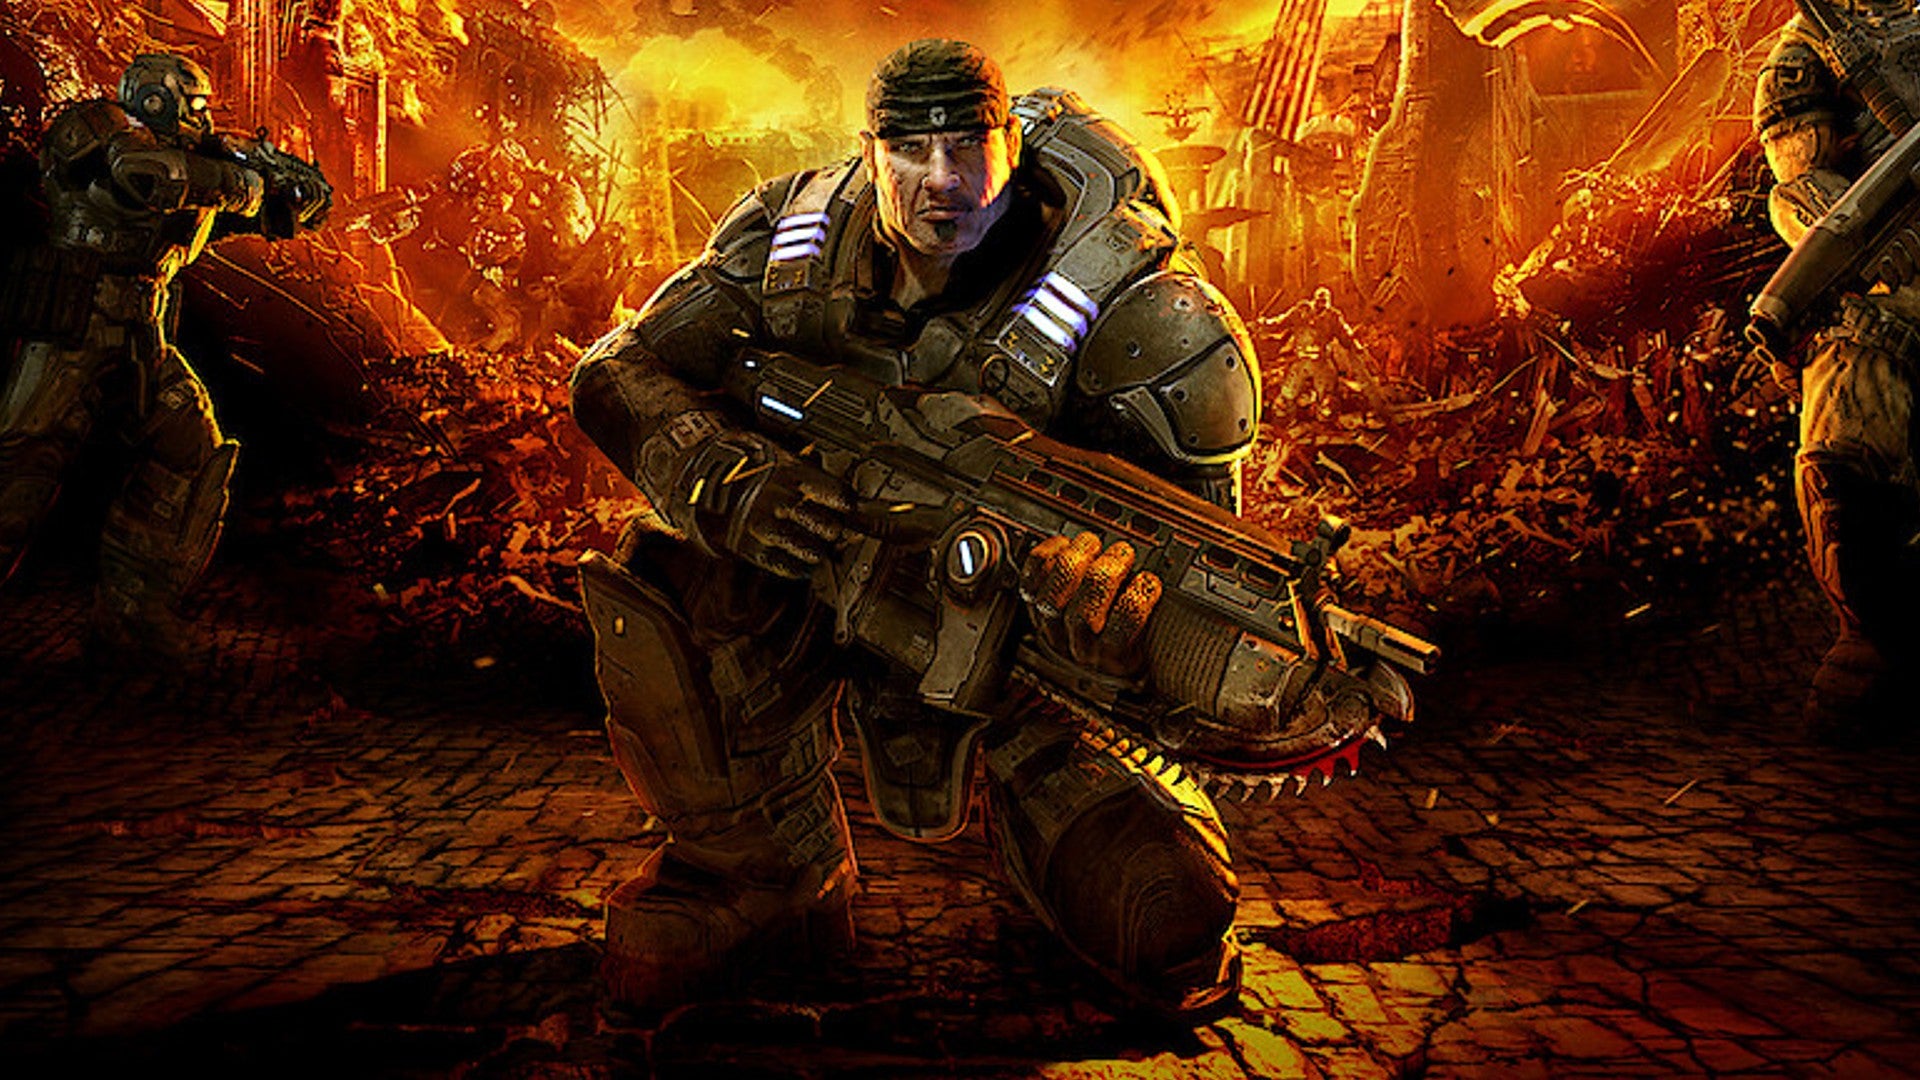 Gears Of War isn't just a game, it's tradition | Rock Paper Shotgun